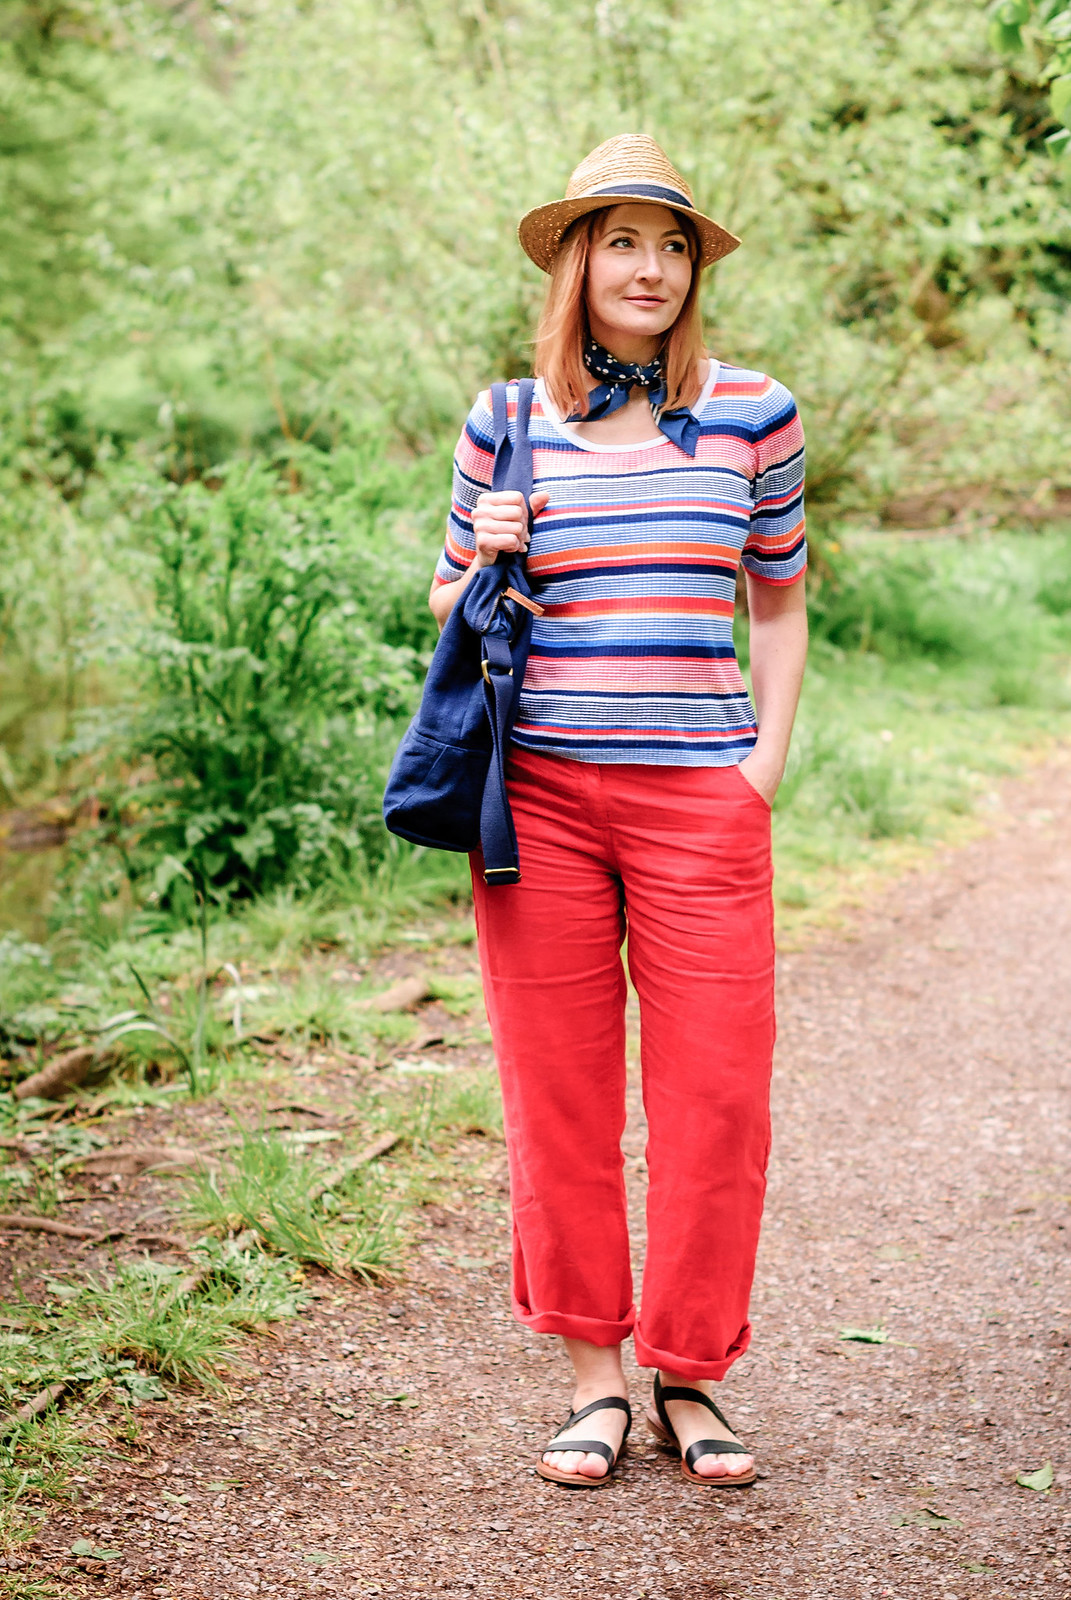 Preppy summer style from Seasalt Cornwall multicoloured stripe t-shirt wide leg red trousers navy knotted neck scarf straw fedora hat | Not Dressed As Lamb, over 40 style